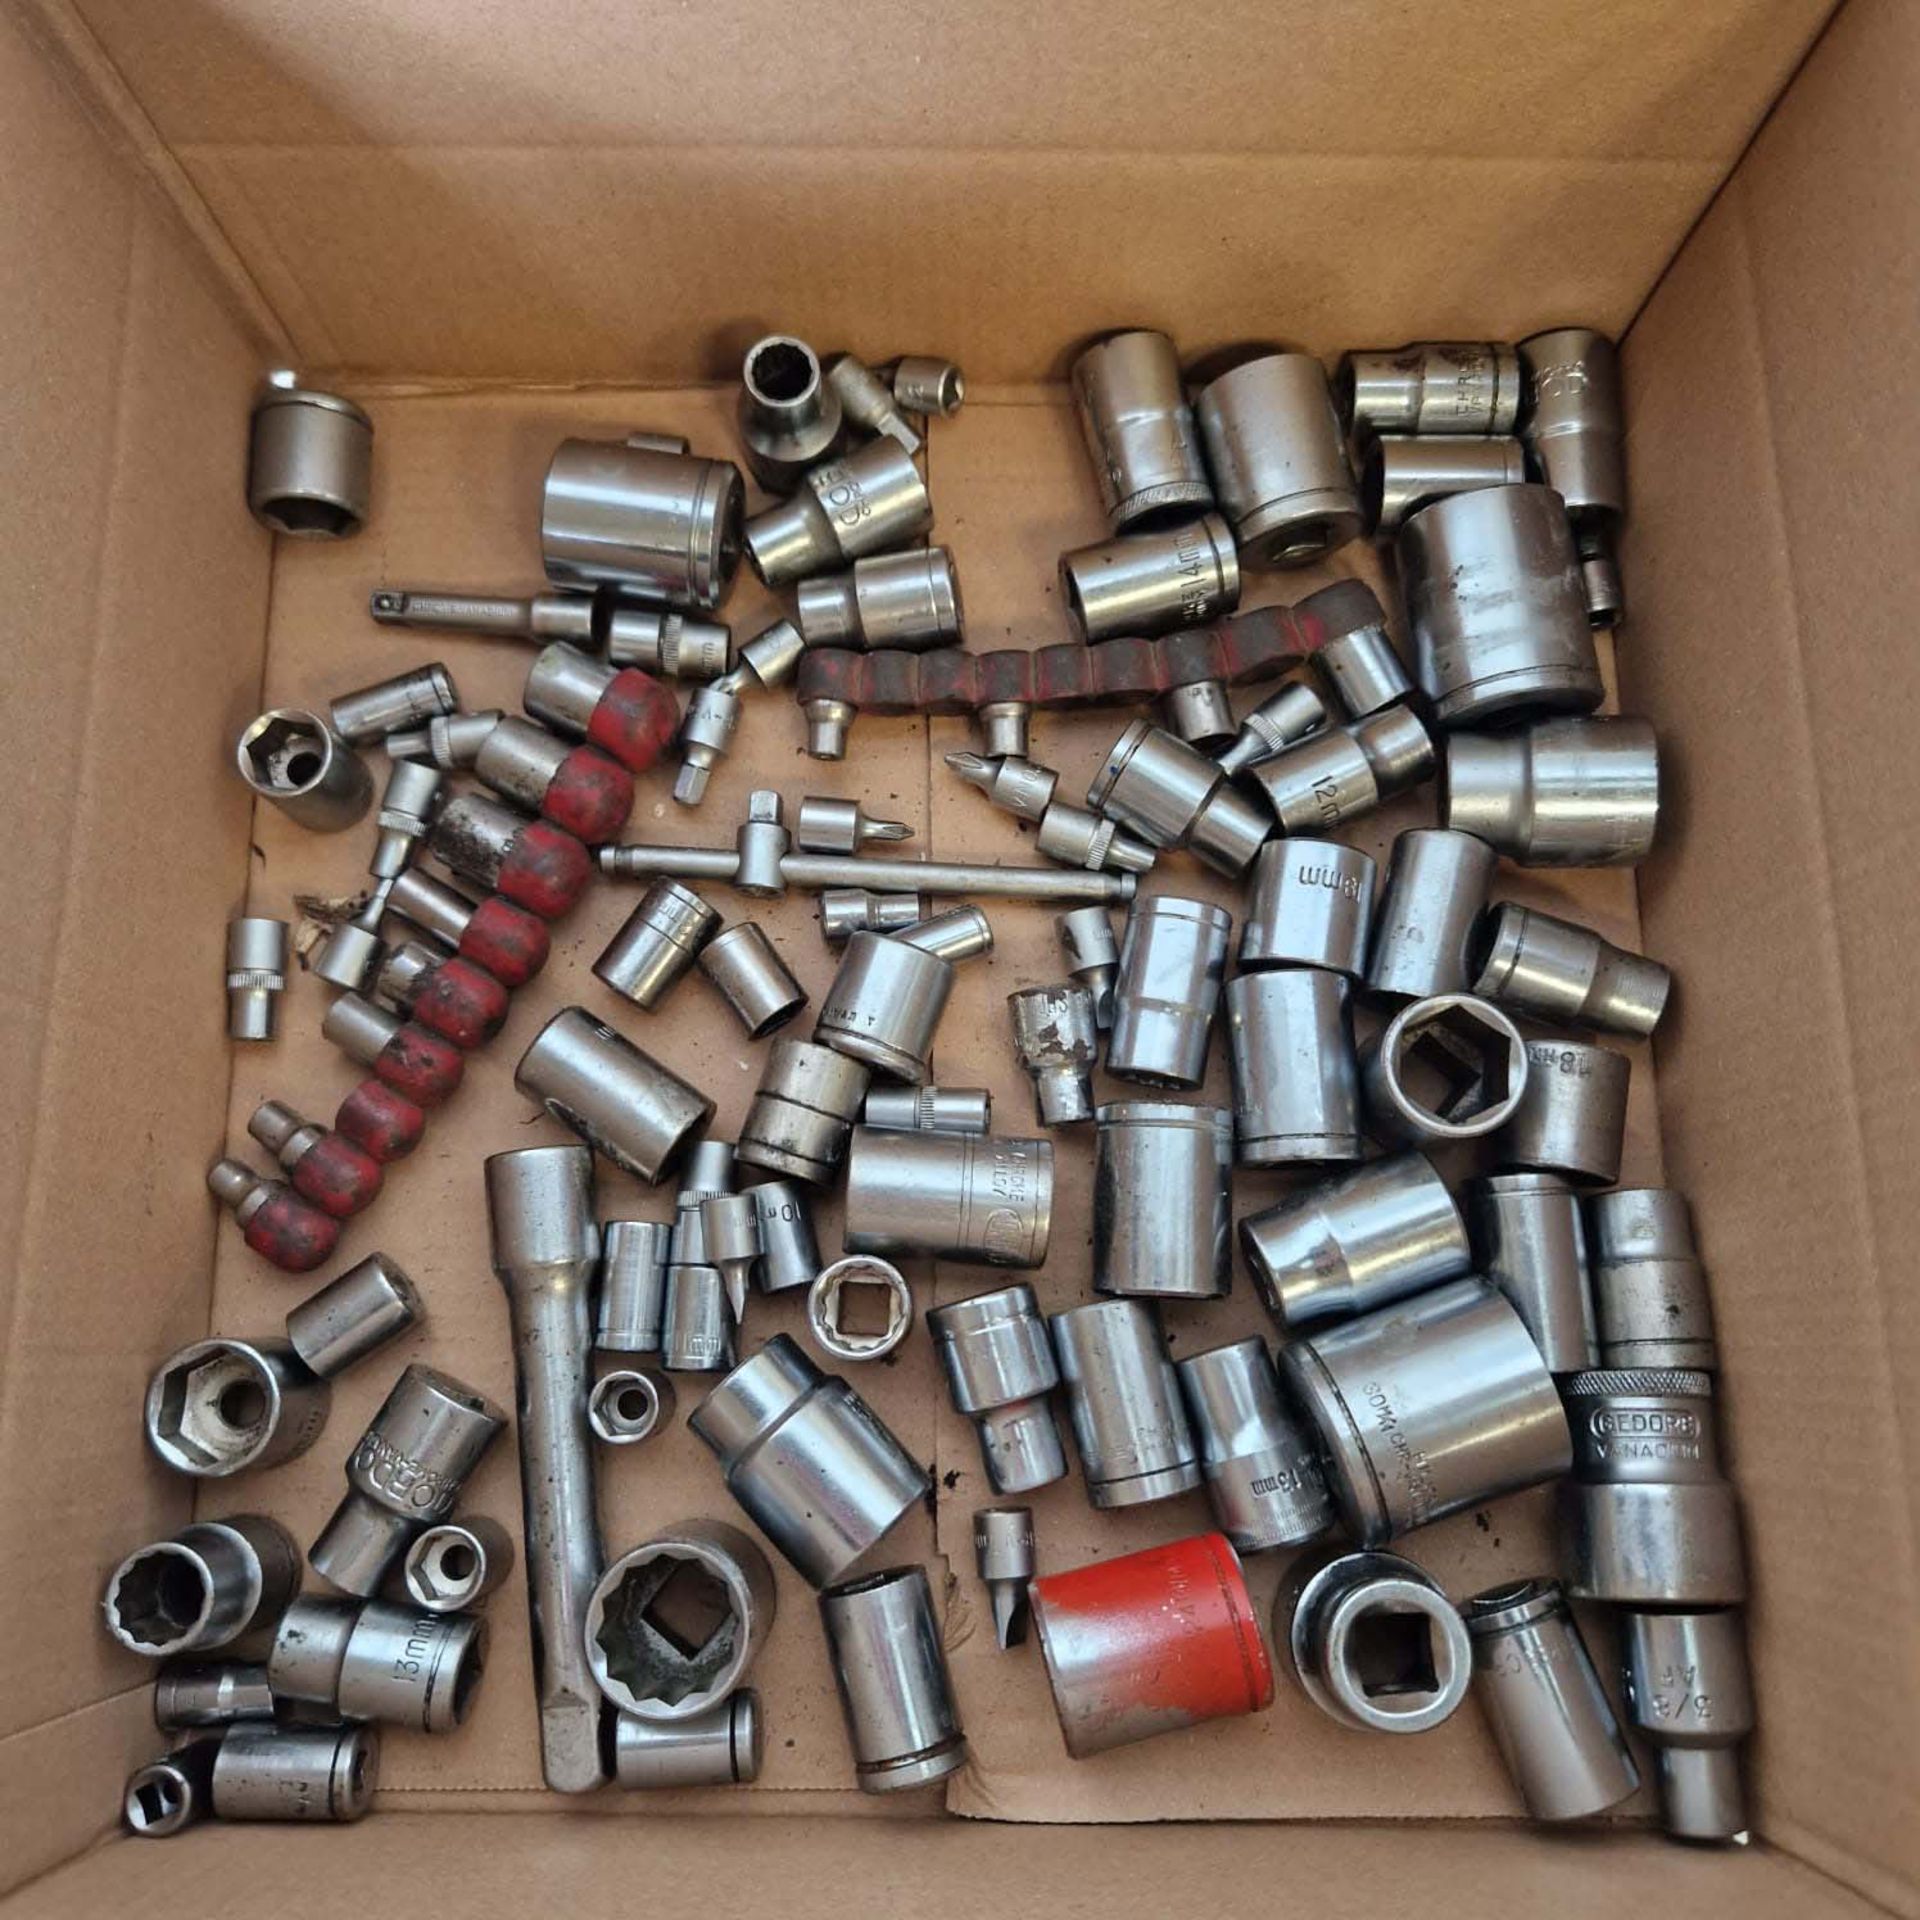 Quantity of Various Sized Sockets.